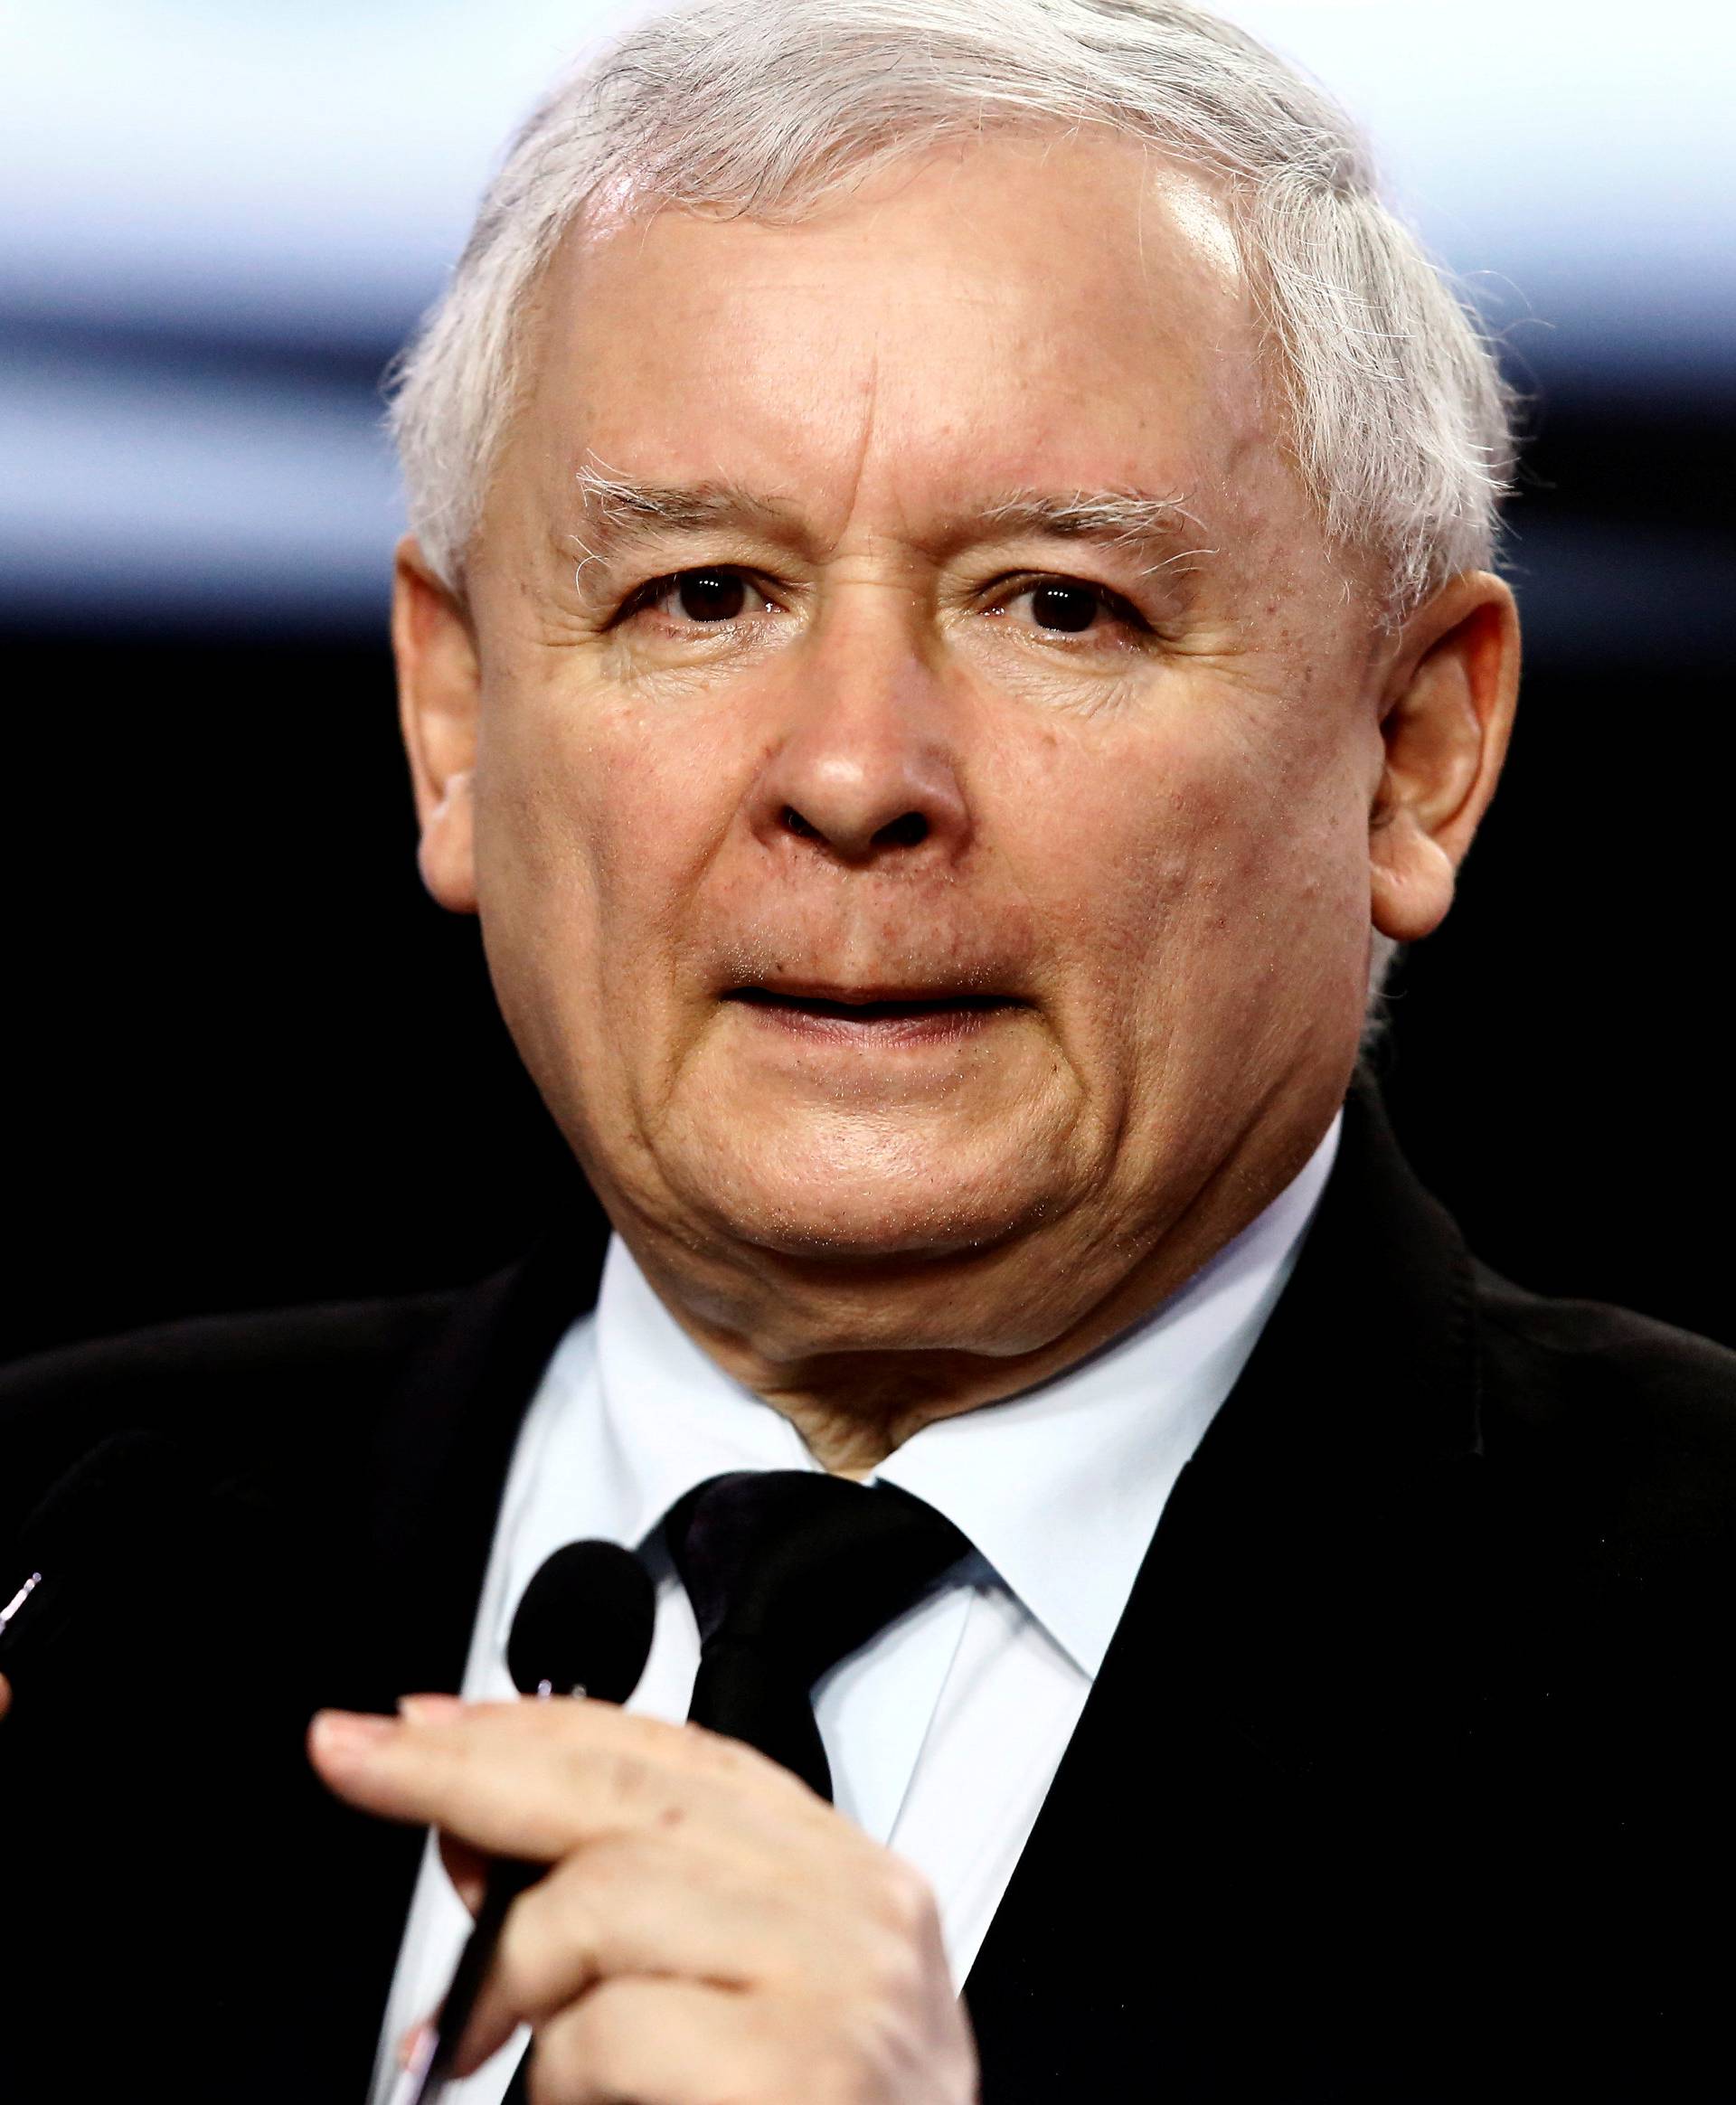 Kaczynski, leader of ruling party Law and Justice  attends a news conference about Brexit in party headquarters in Warsaw